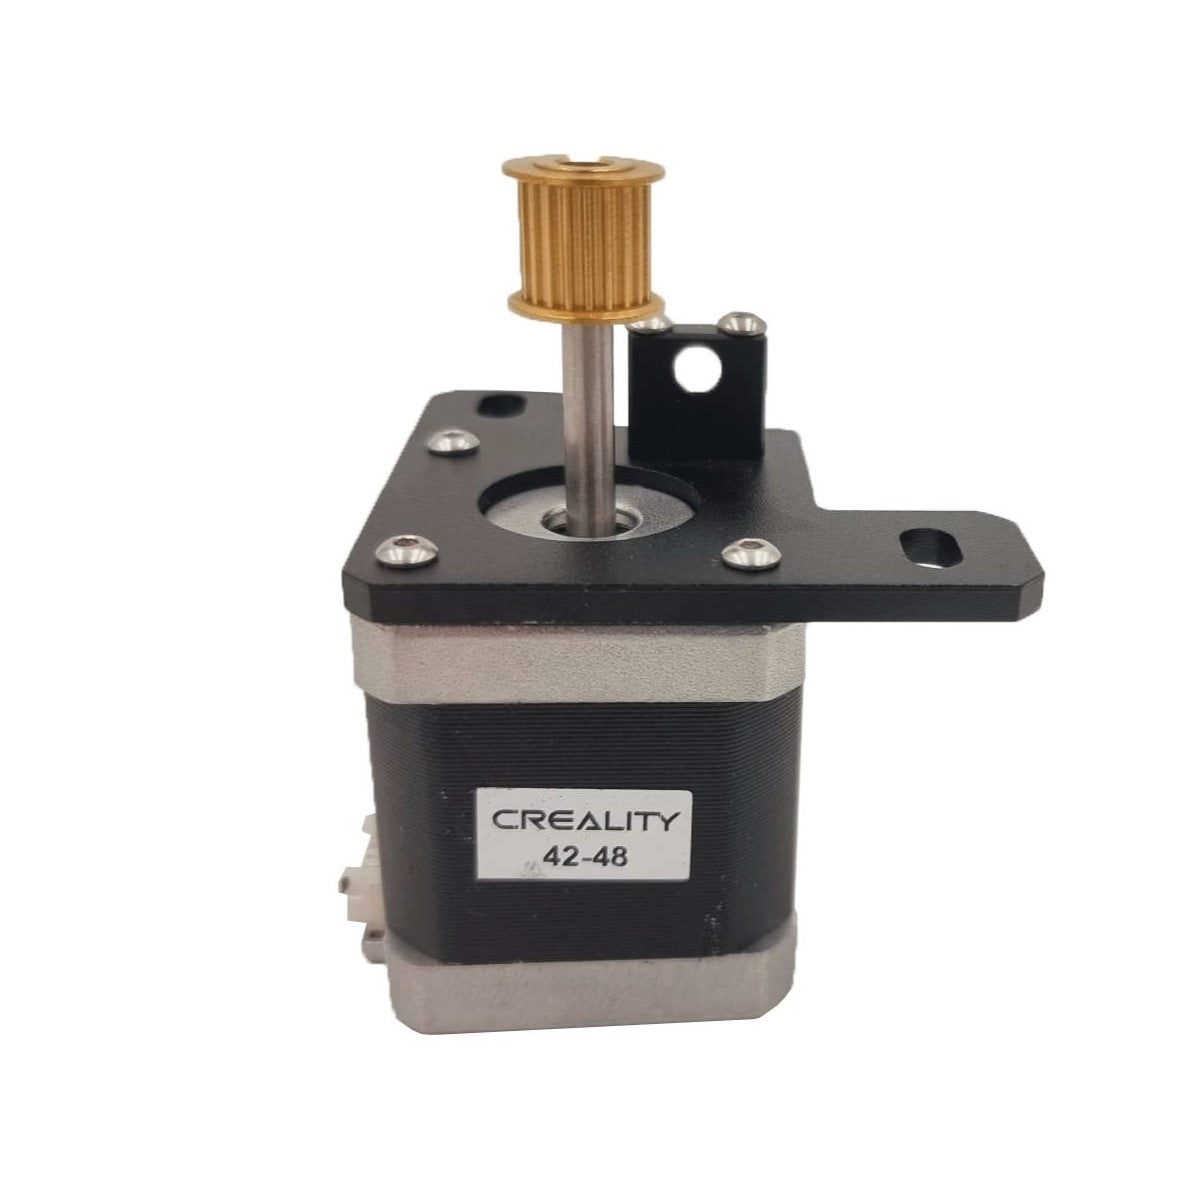 Creality 3D Ender 6 42-48 X/Y Axis Stepper Motor - Long Shaft